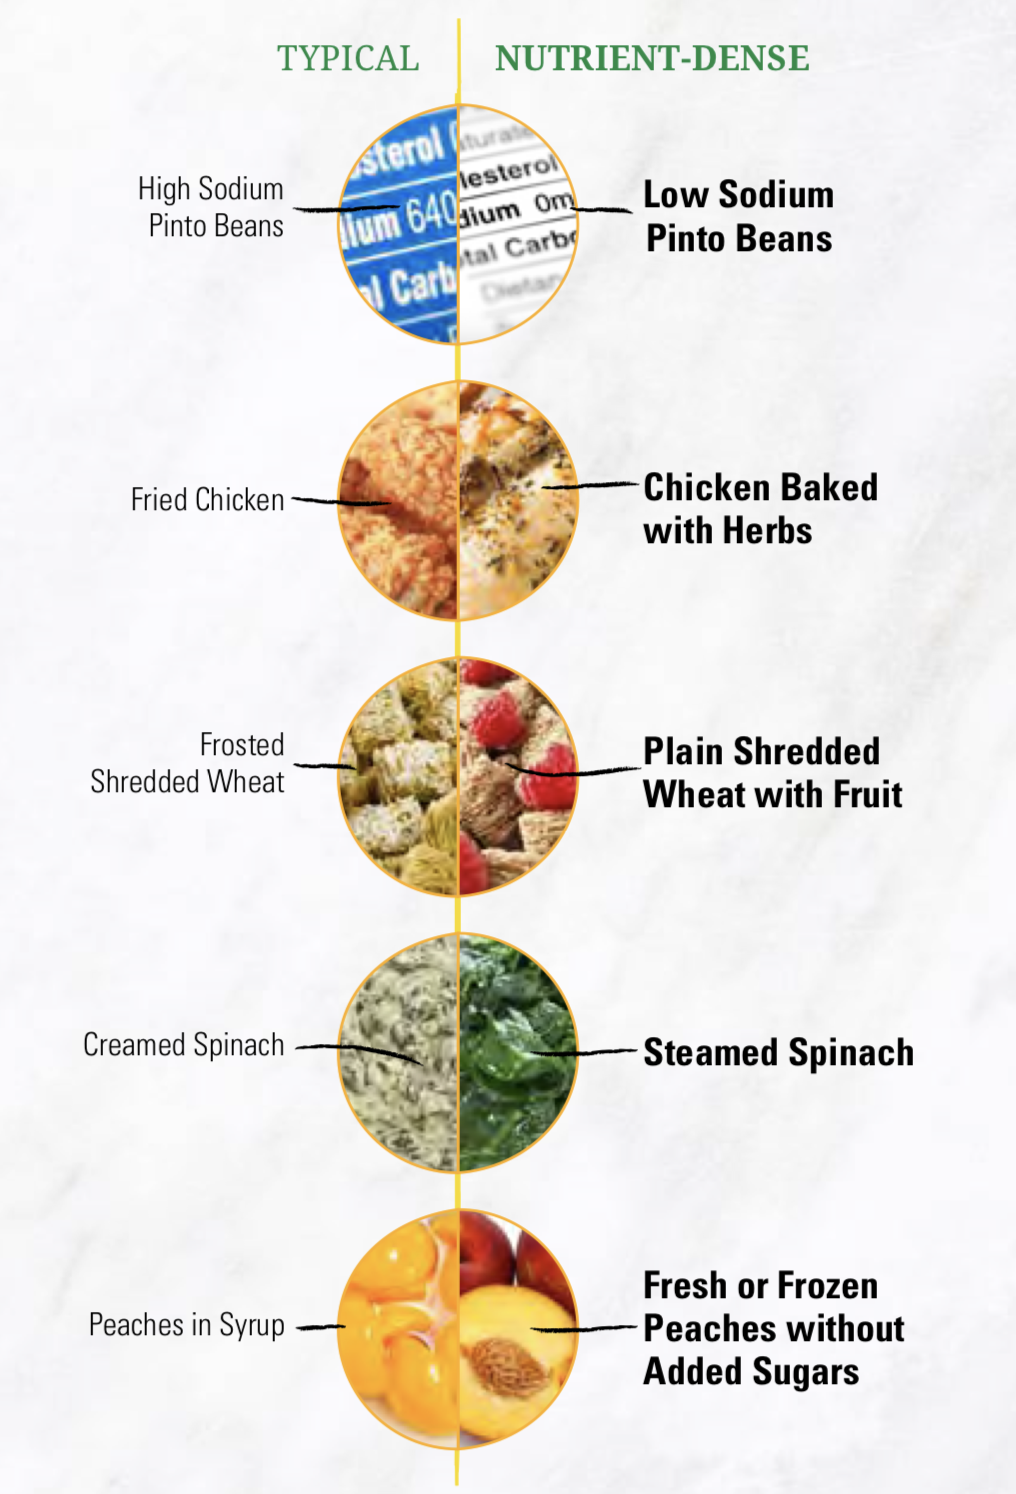 There are 5 circles going down the graphic that are divided in half showing typical food choices on the left side and nutrient-dense choices shown on the right side. For example, fried chicken is on the typical side and chicken baked with herbs is shown on the nutrient-dense side. Also shown are frosted shredded wheat (typical side) and plain wheat cereal (nutrient dense side); creamed spinach (typical side) and steamed spinach (nutrient-dense side); canned peaches (typical side) and fresh or frozen peaches without added sugars (nutrient-dense side).